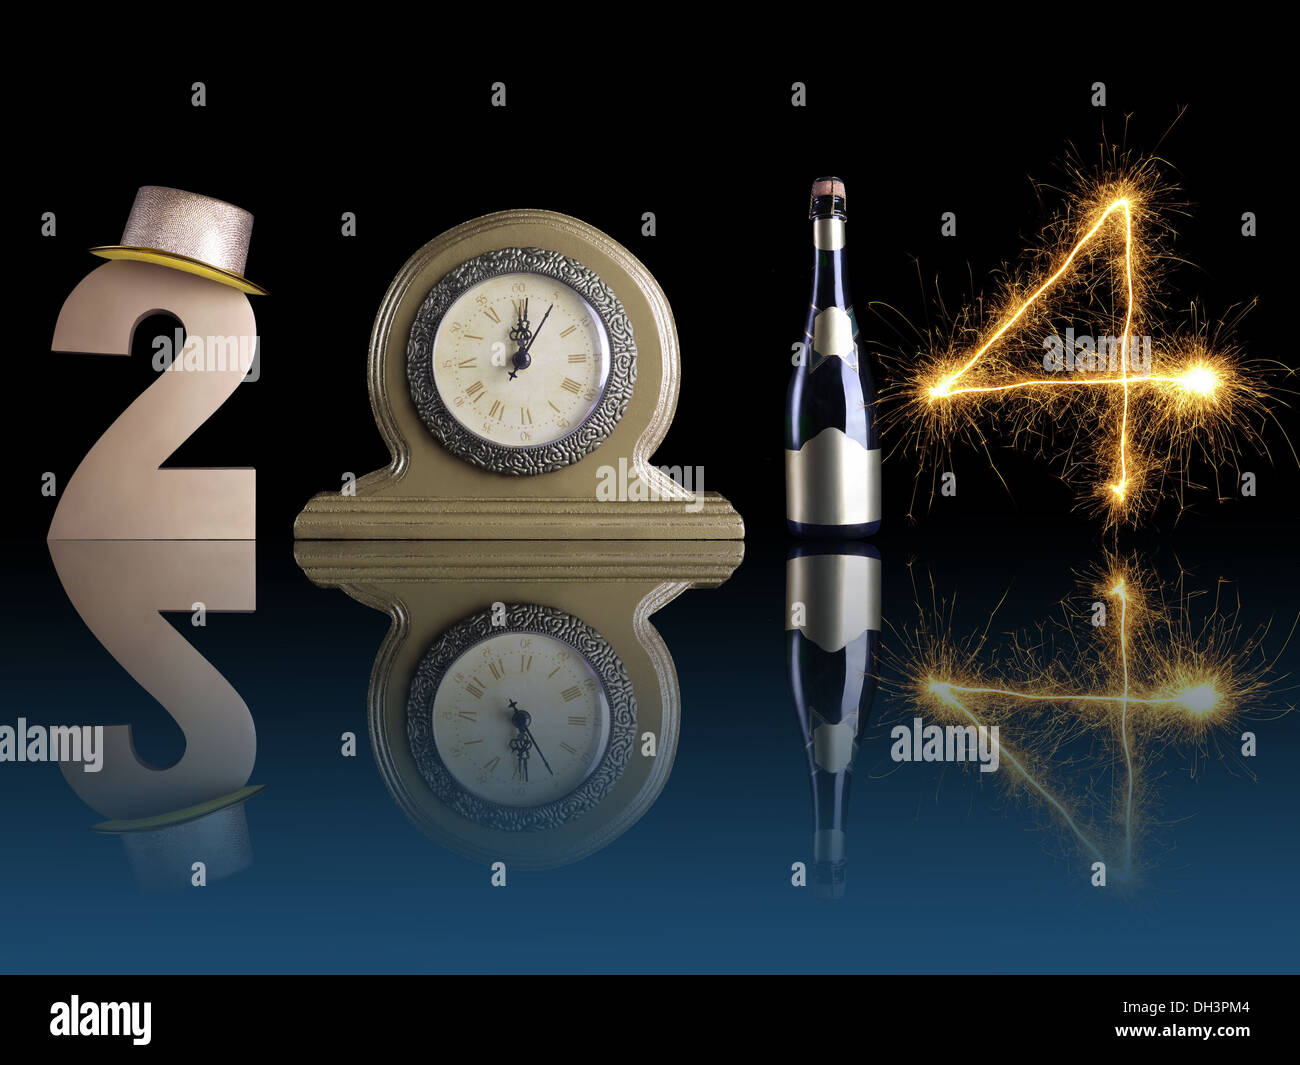 New Year 2014 set up of golden digit two, table clock, bottle of champagne and digit four created from burning sparkler Stock Photo